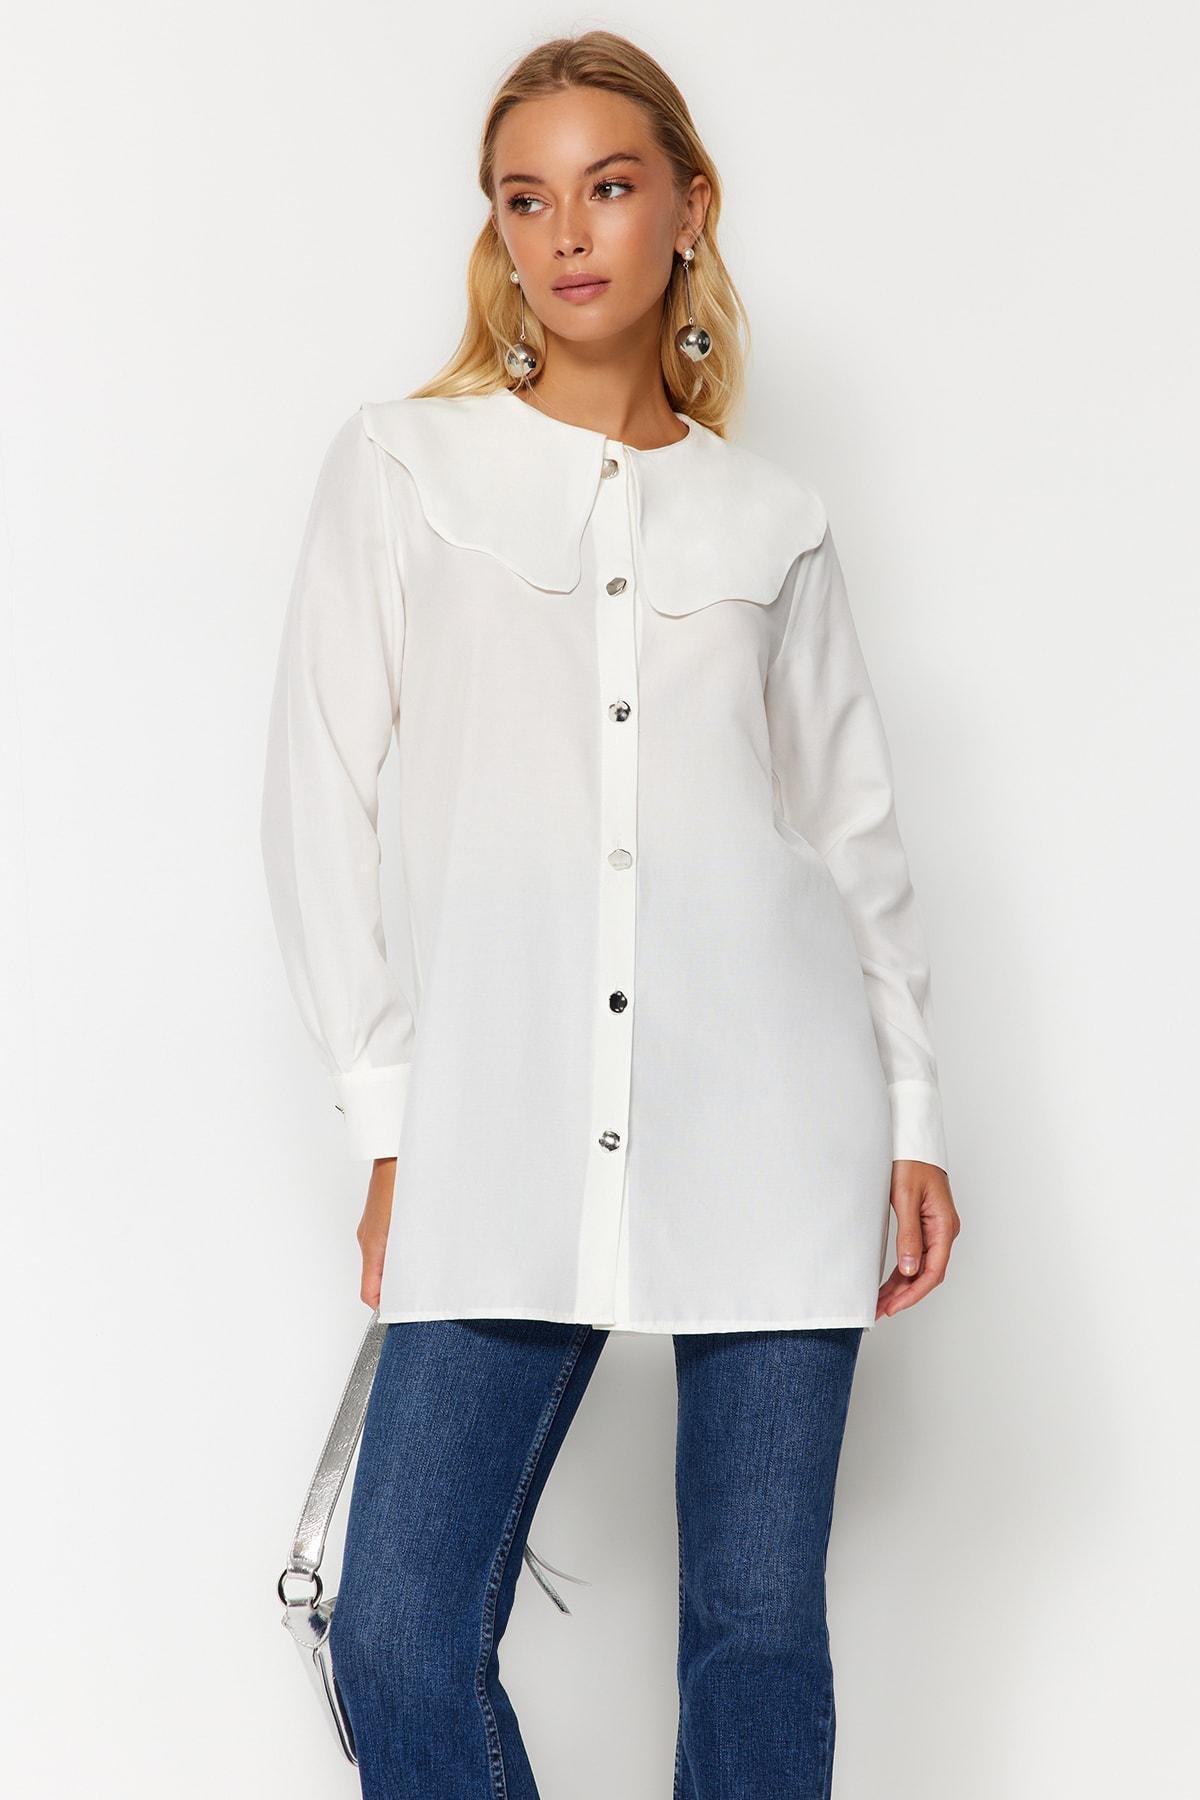 Trendyol - White Silver Buttoned Baby Collar Shirt